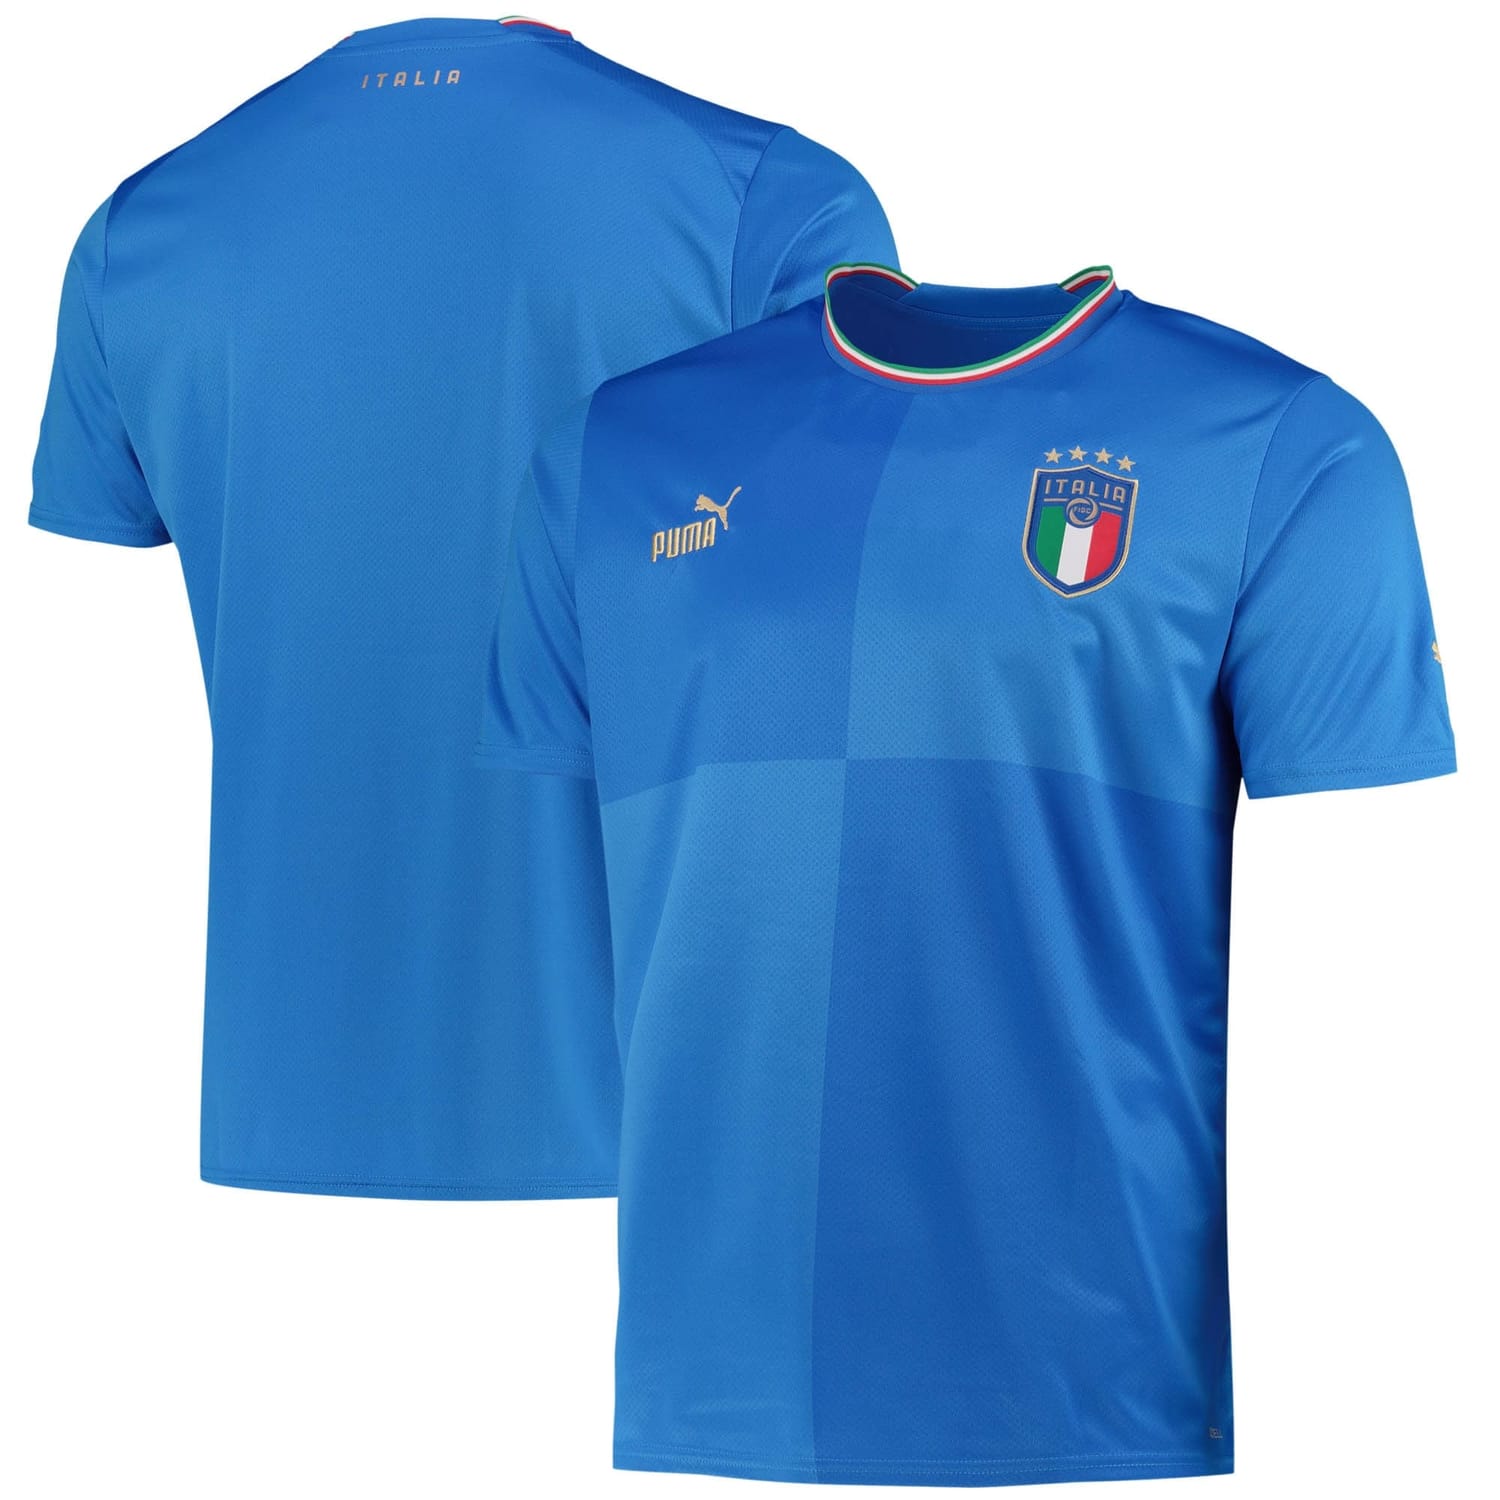 Italy National Team Home Jersey Shirt 2022 for Men